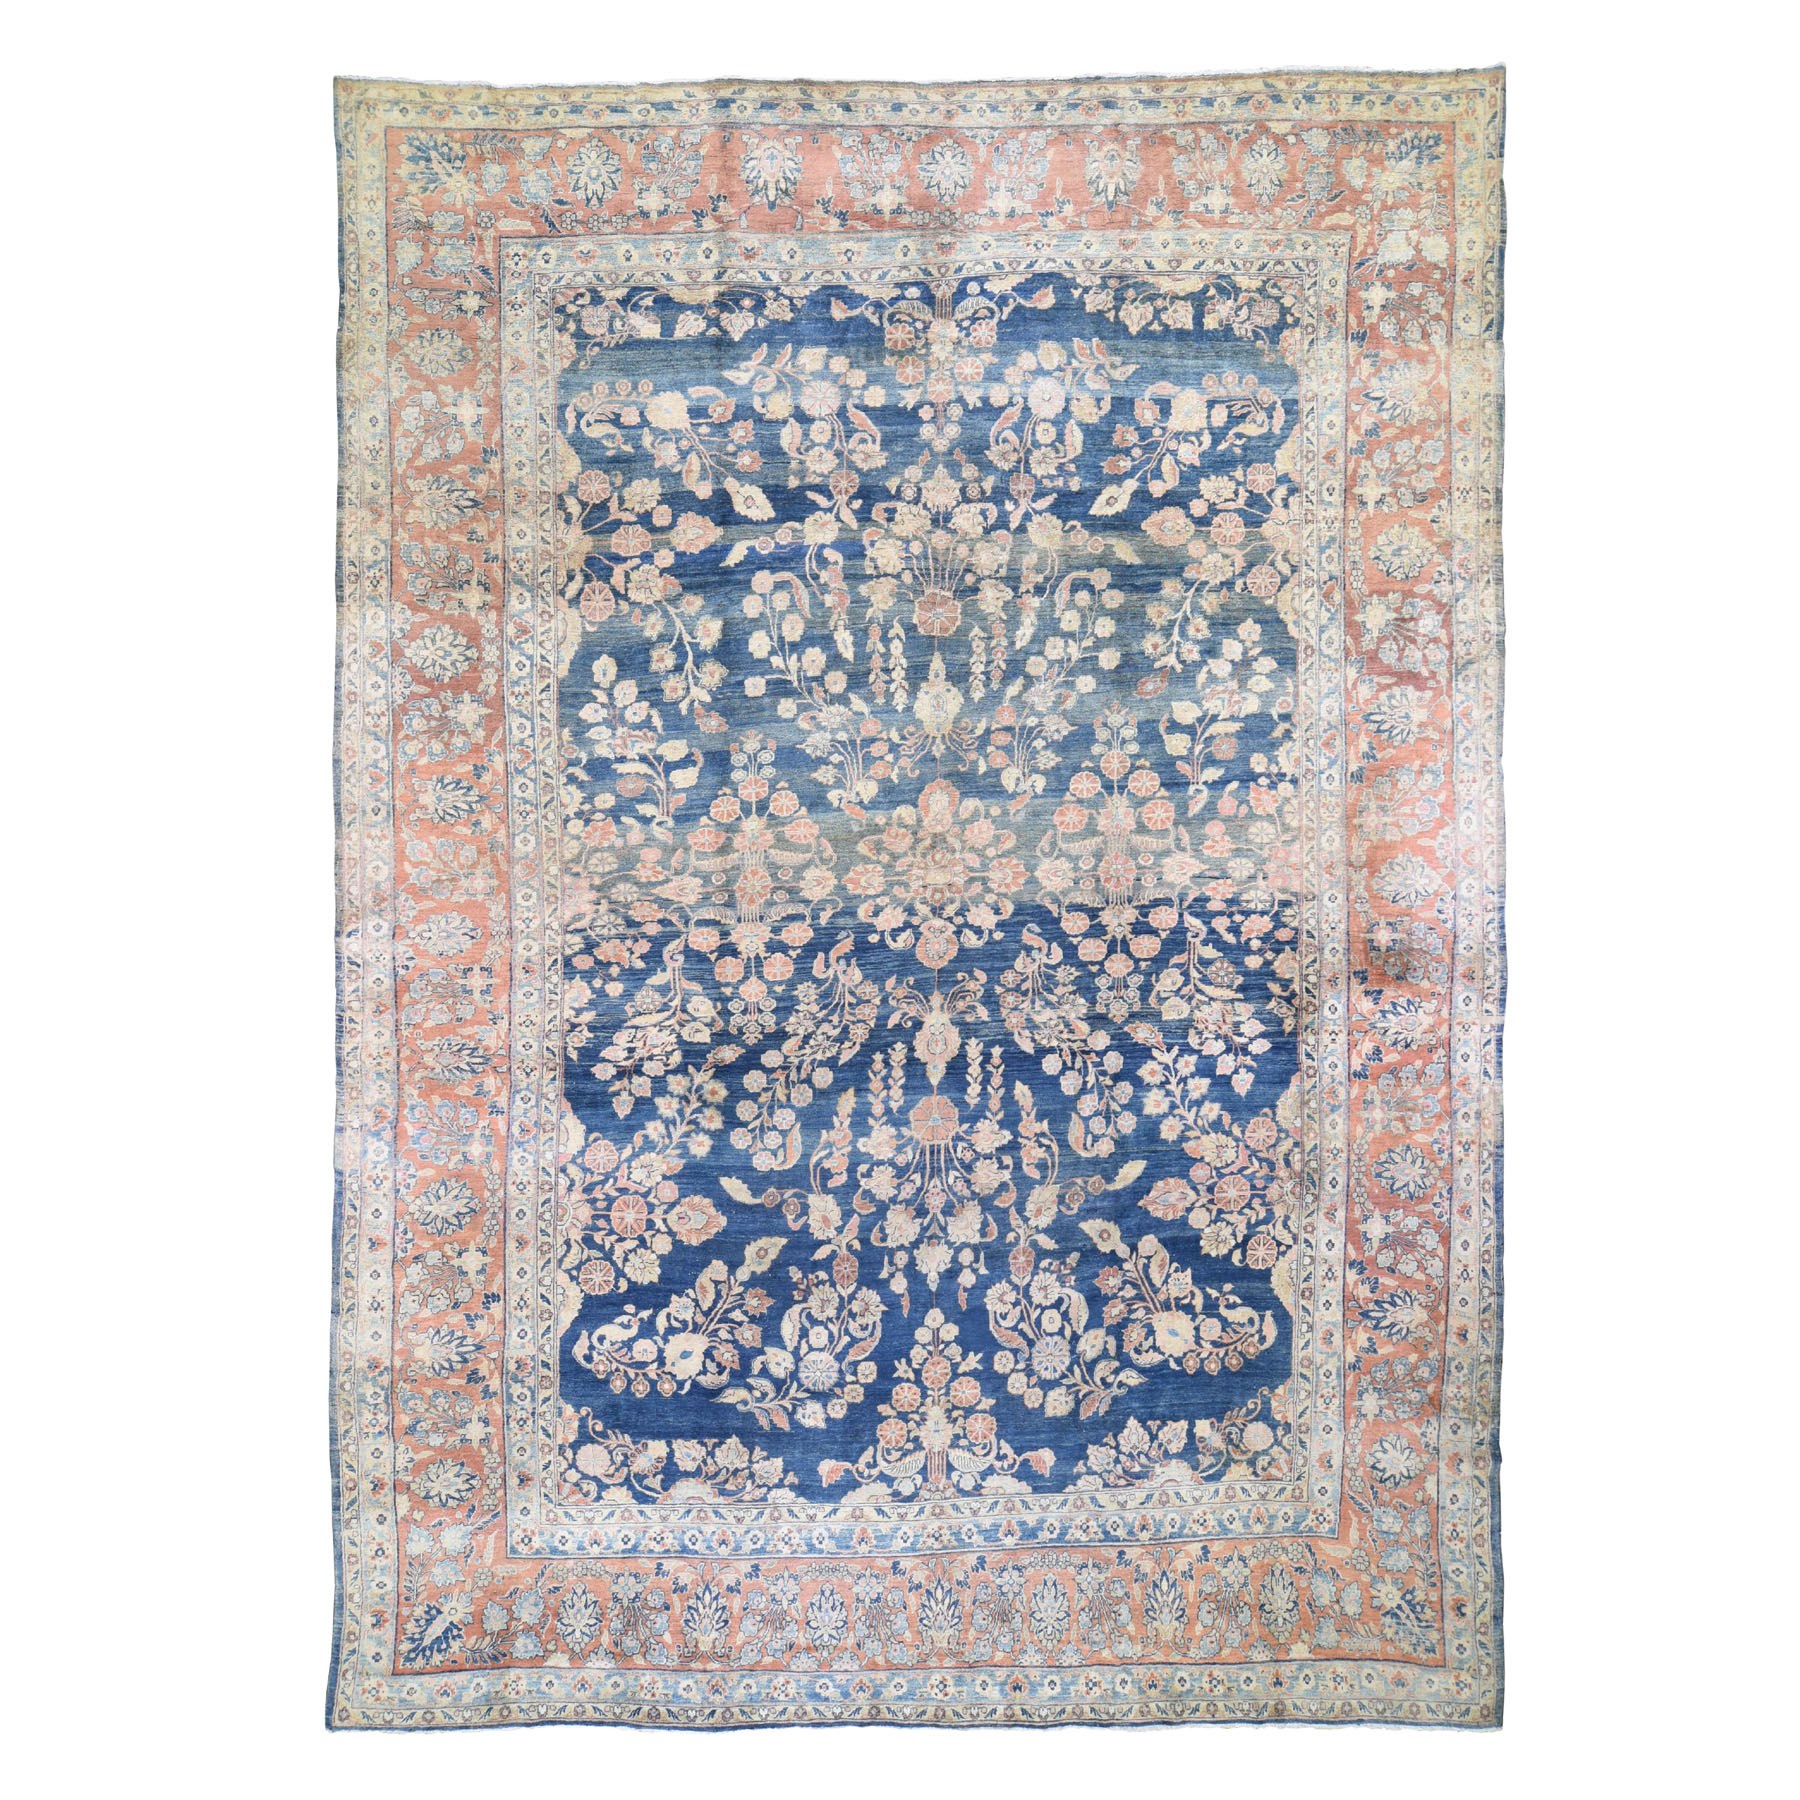 10'7"X14'10" Blue Antique Persian Mohojaren Sarouk Full Soft Pile Abrush Hand Knotted Oriental Rug moad80cb